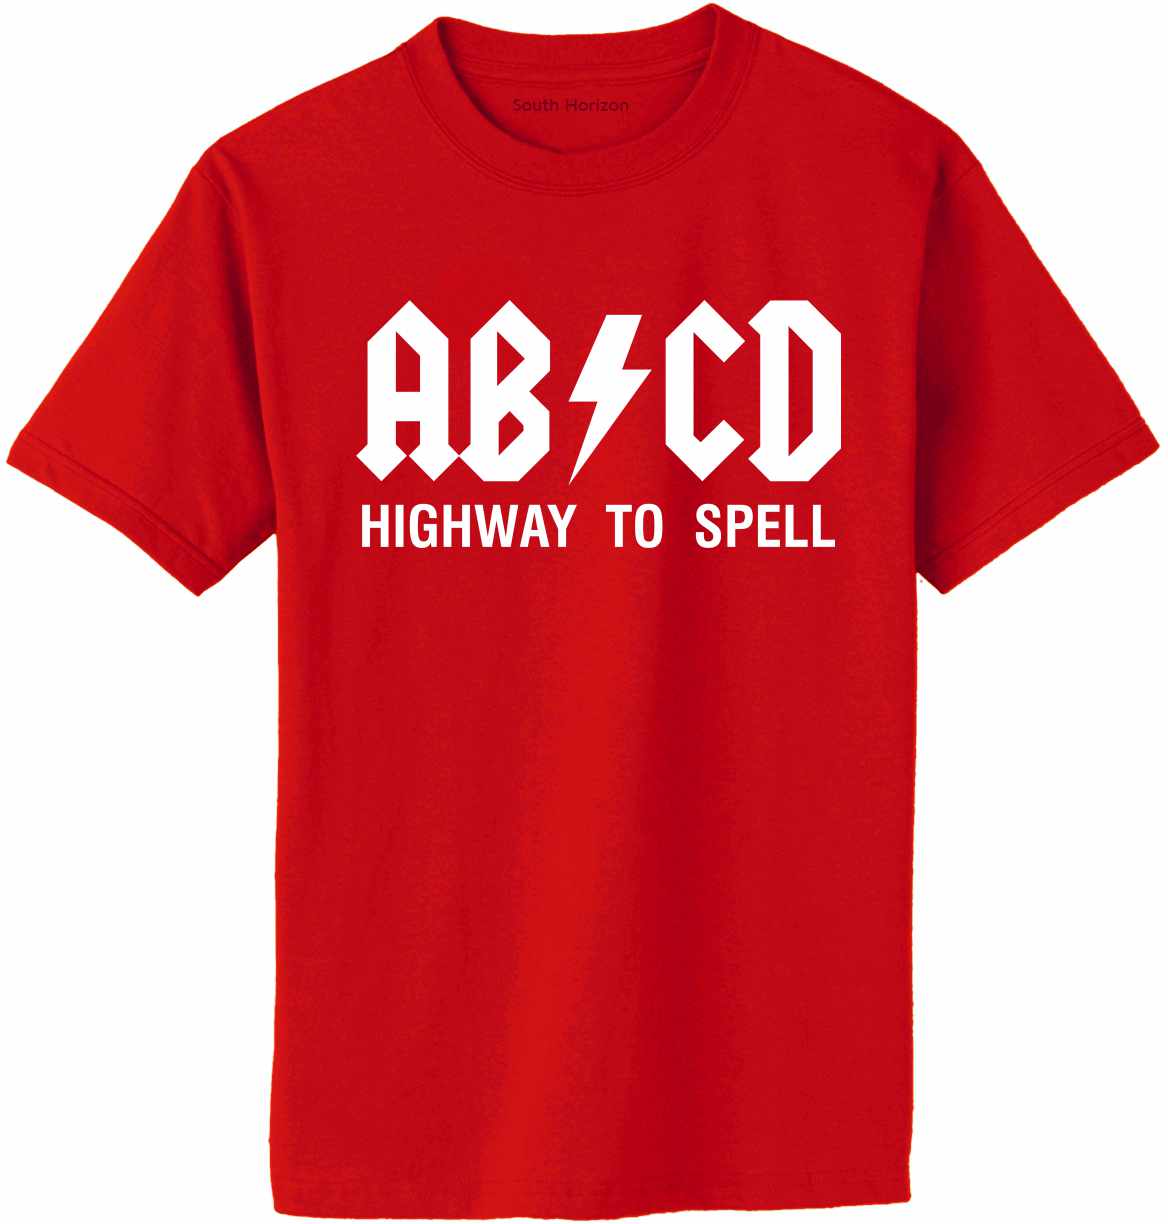 ABCD Highway To Spell on Adult T-Shirt (#1236-1)